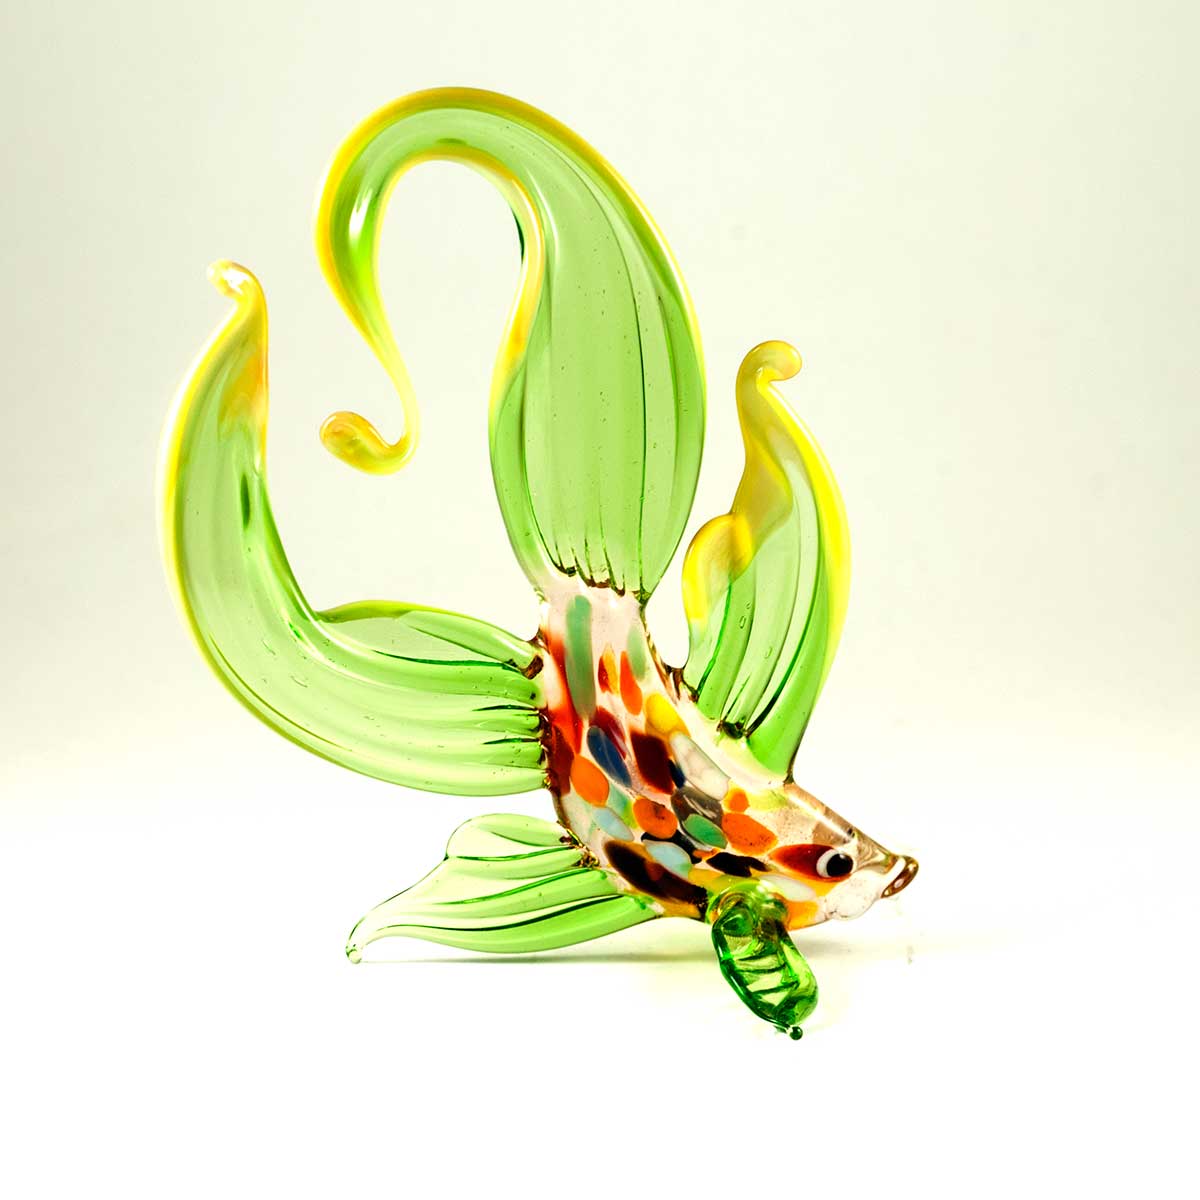 Glass Fish Figure in Glass Figurines Sea Life Creatures category